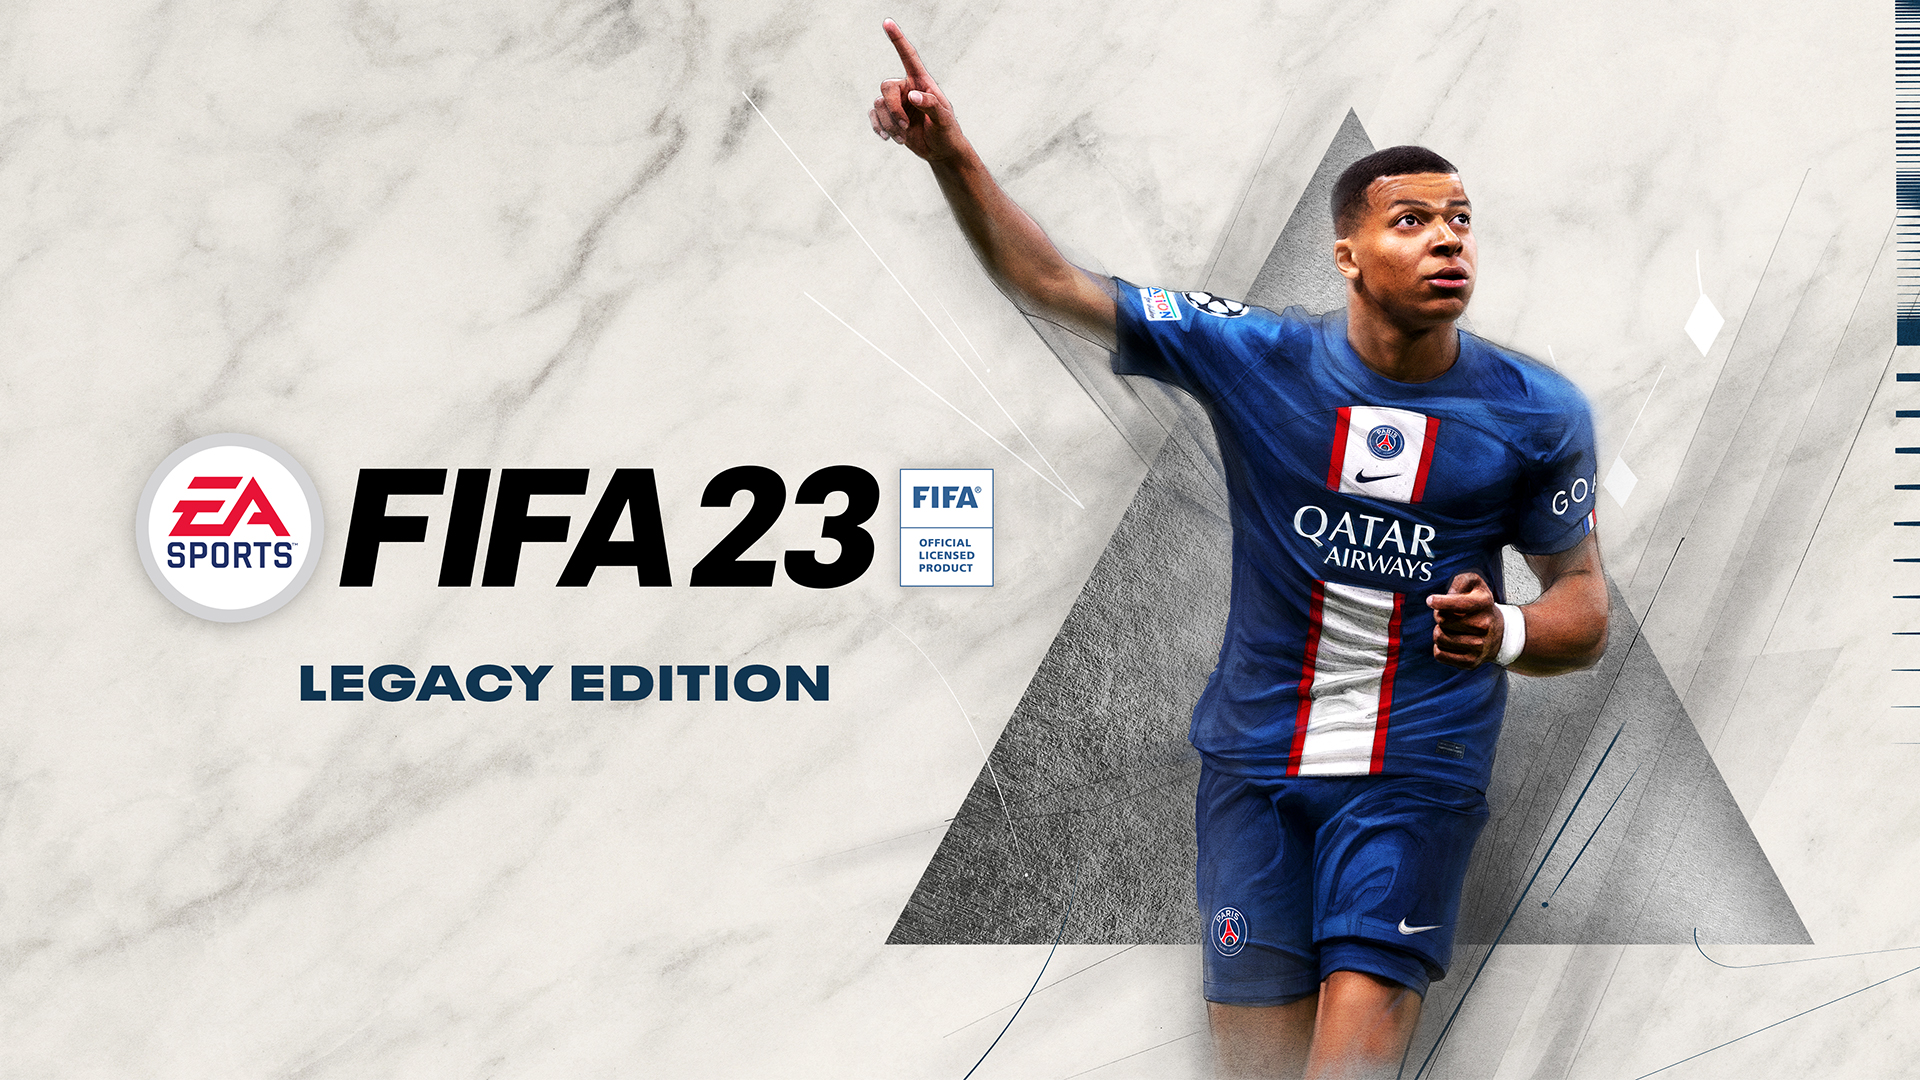 FIFA 23 CRACK, ULTIMATE EDITION, FREE DOWNLOAD PC